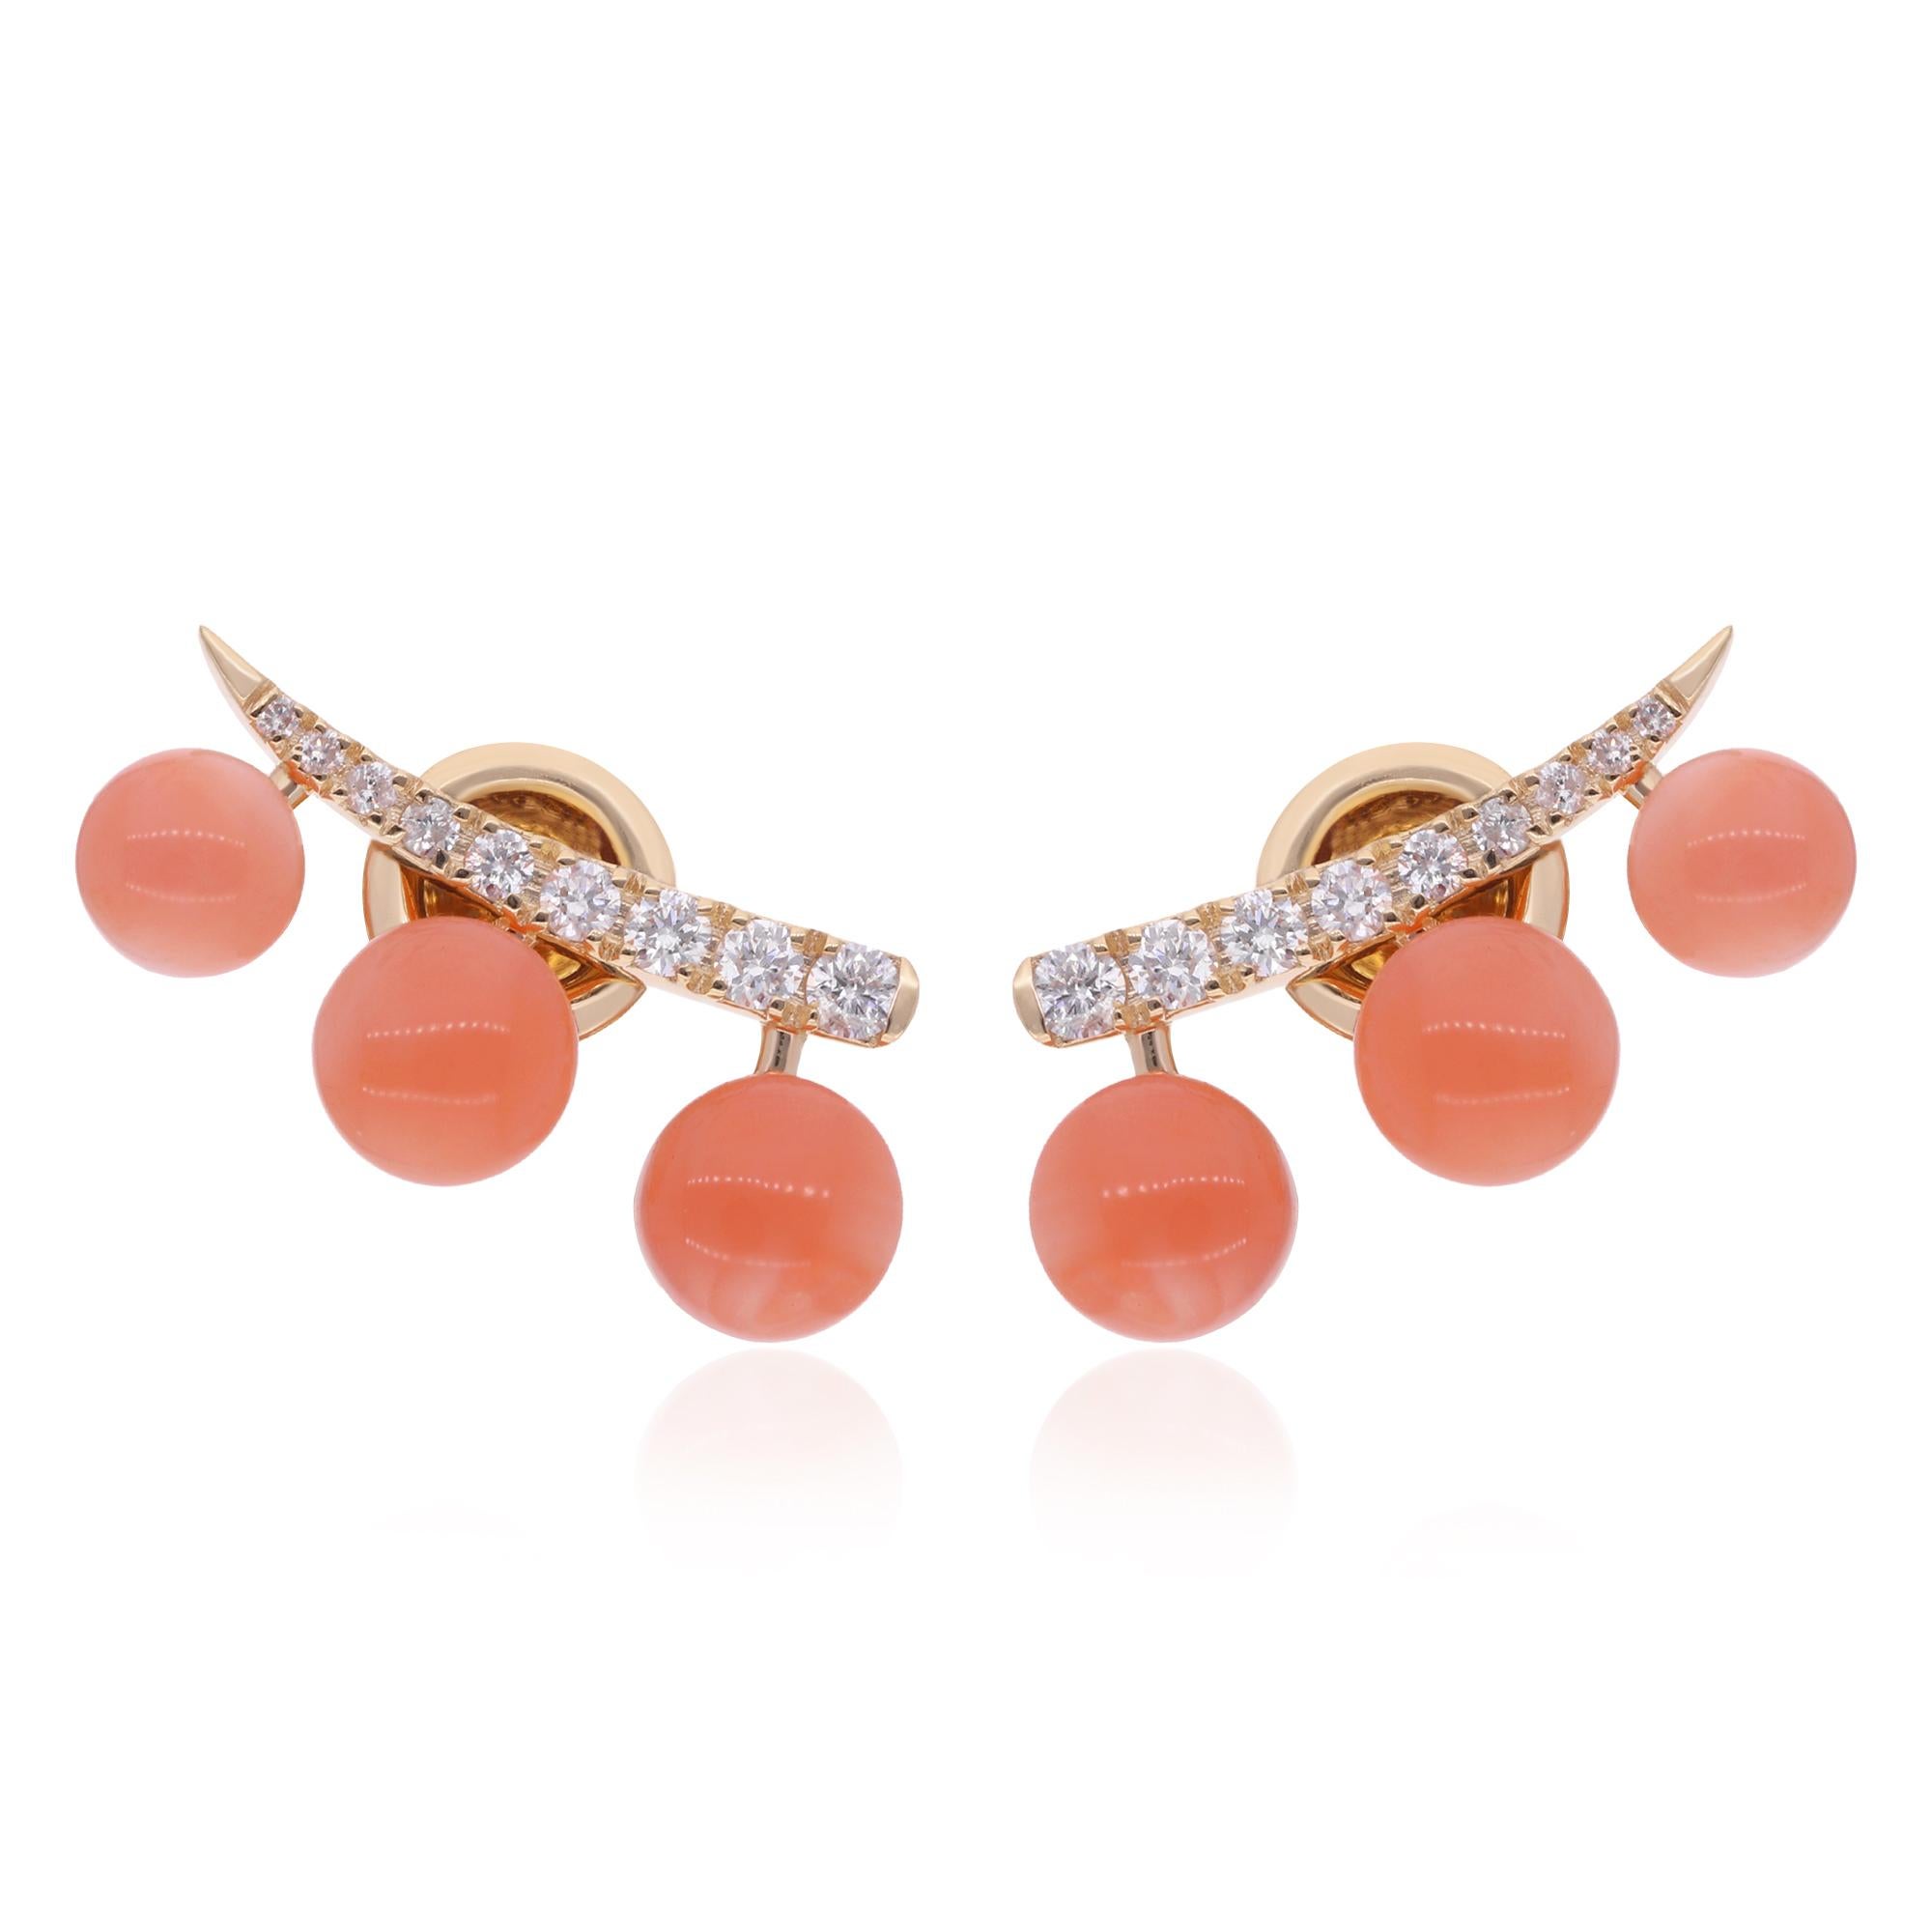 Immerse yourself in the vibrant beauty of nature with these Coral Gemstone Climber Earrings, meticulously handmade in radiant 14 karat yellow gold and adorned with dazzling diamonds. These exquisite earrings are a celebration of the ocean's